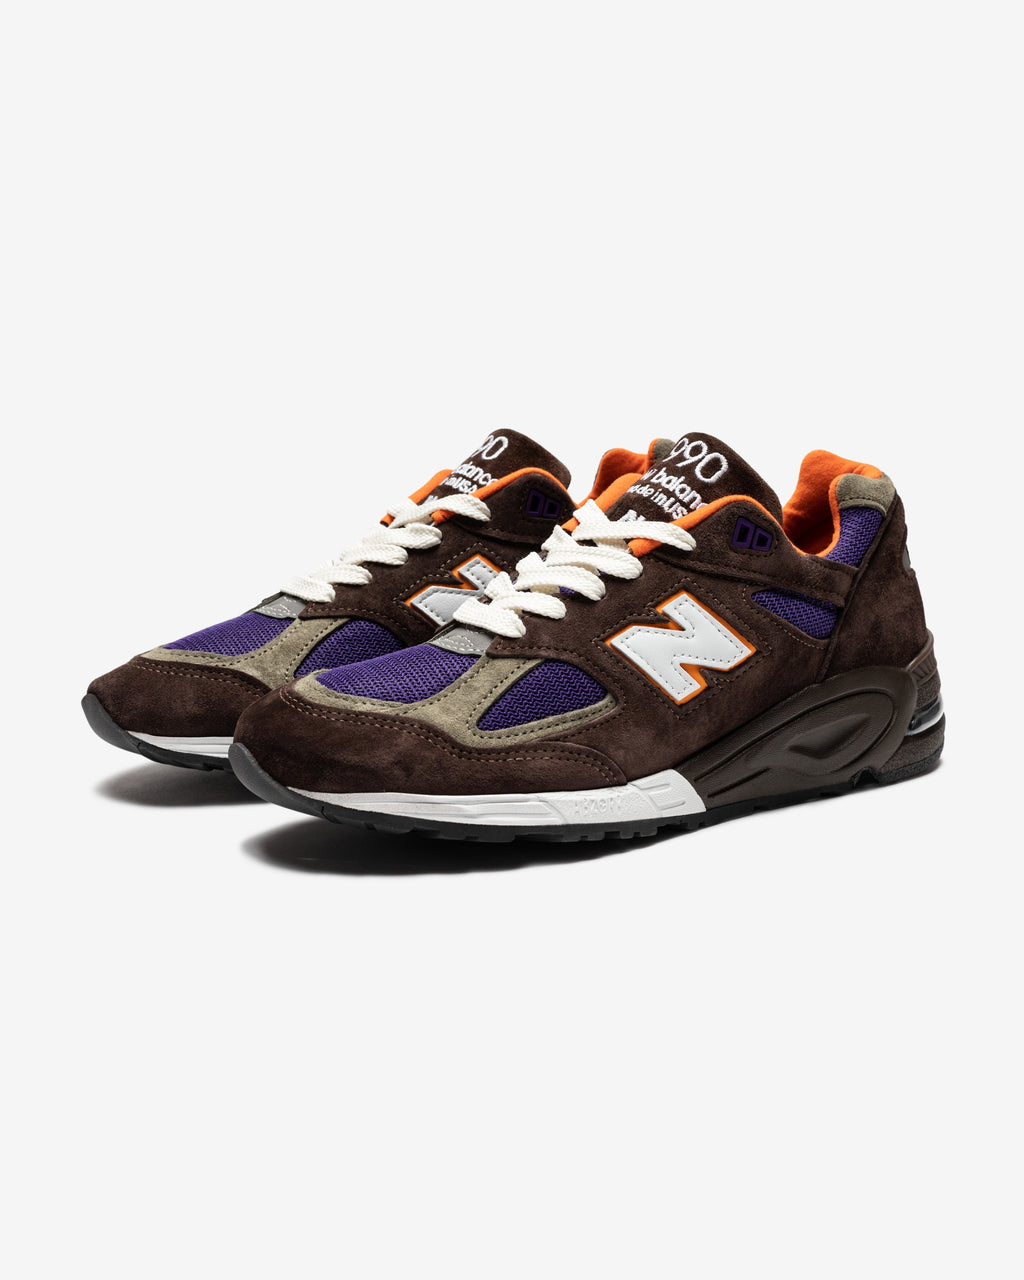 NEW BALANCE "MADE IN USA" 990V2 CORE - BROWN